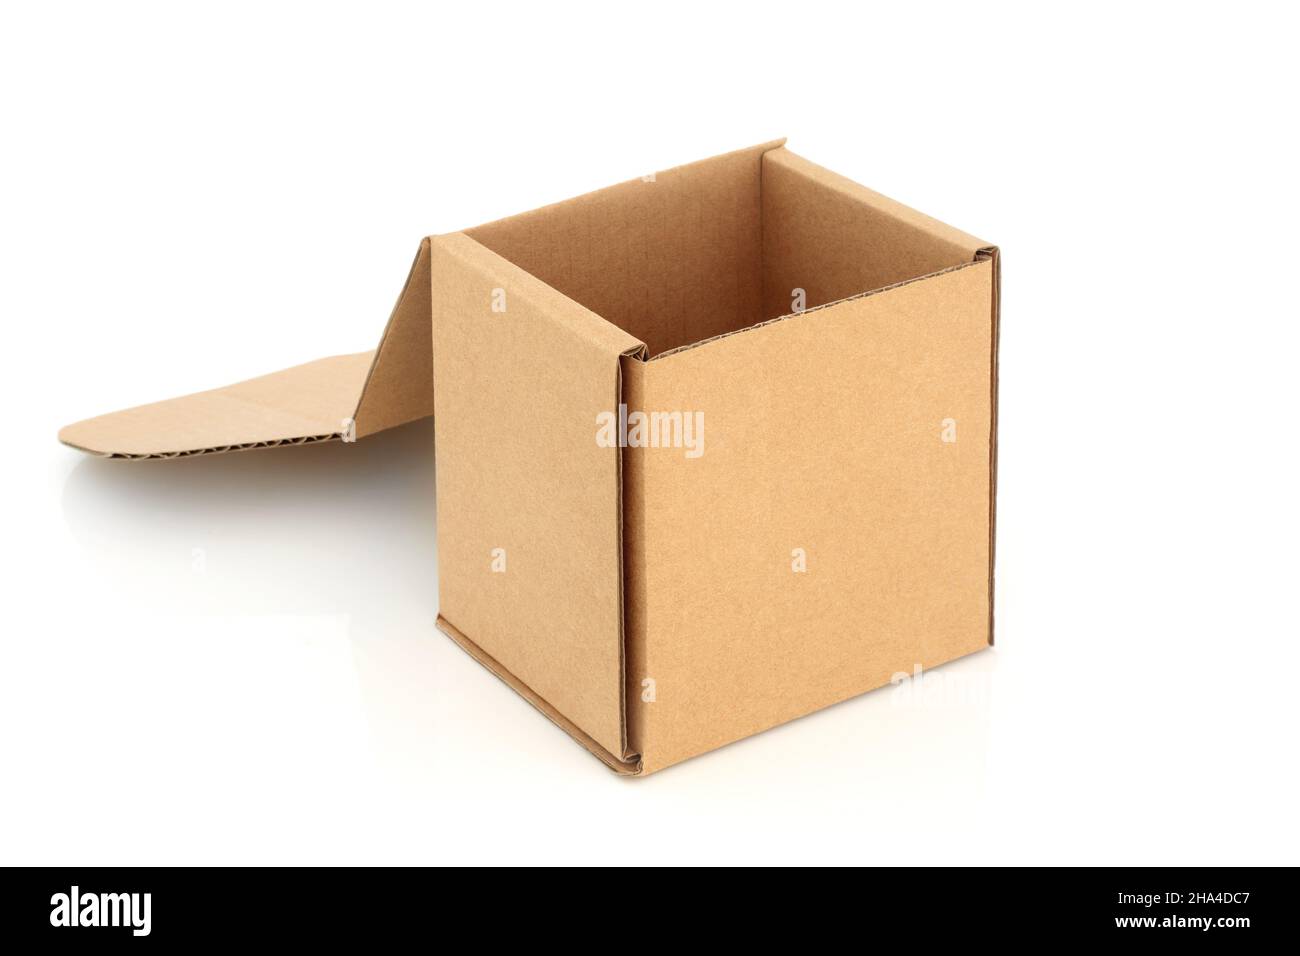 Cardboard box cube shaped container with lid open on white background.  Recycled eco friendly packaging, design element. Copy space Stock Photo -  Alamy